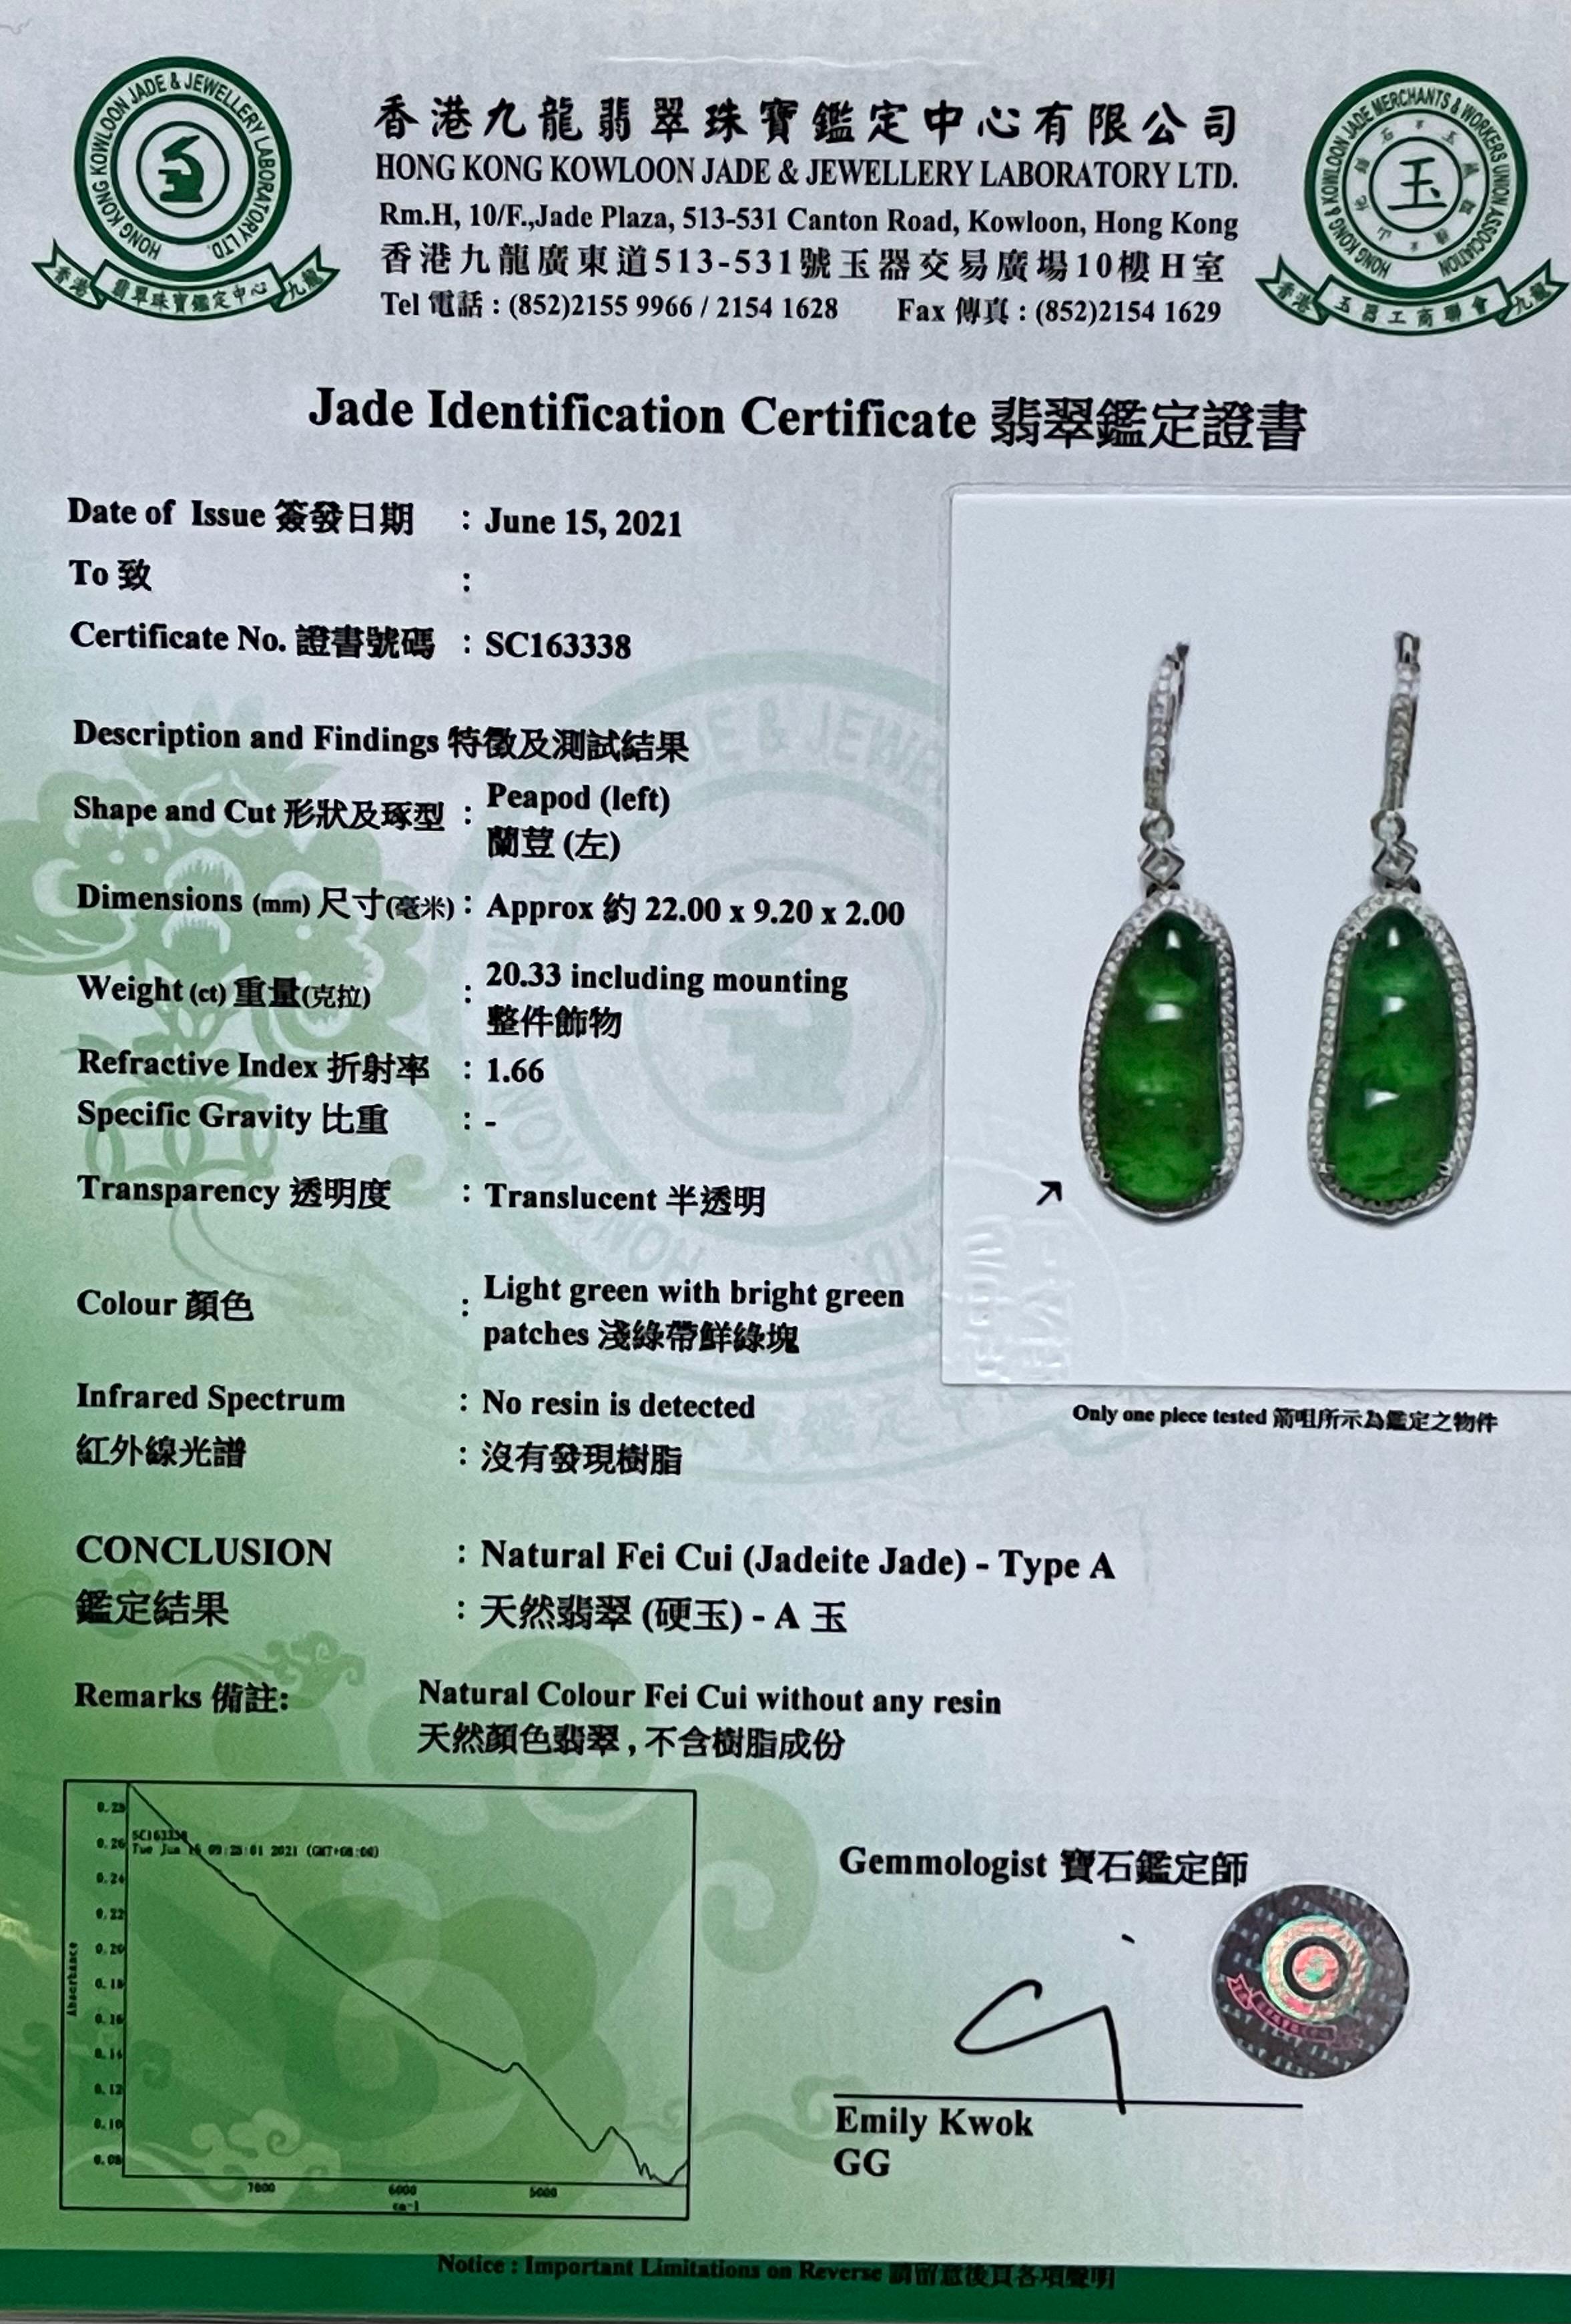 Certified Natural Type A Icy Jade Peapod Diamond Earrings, Glowing Apple Green For Sale 7